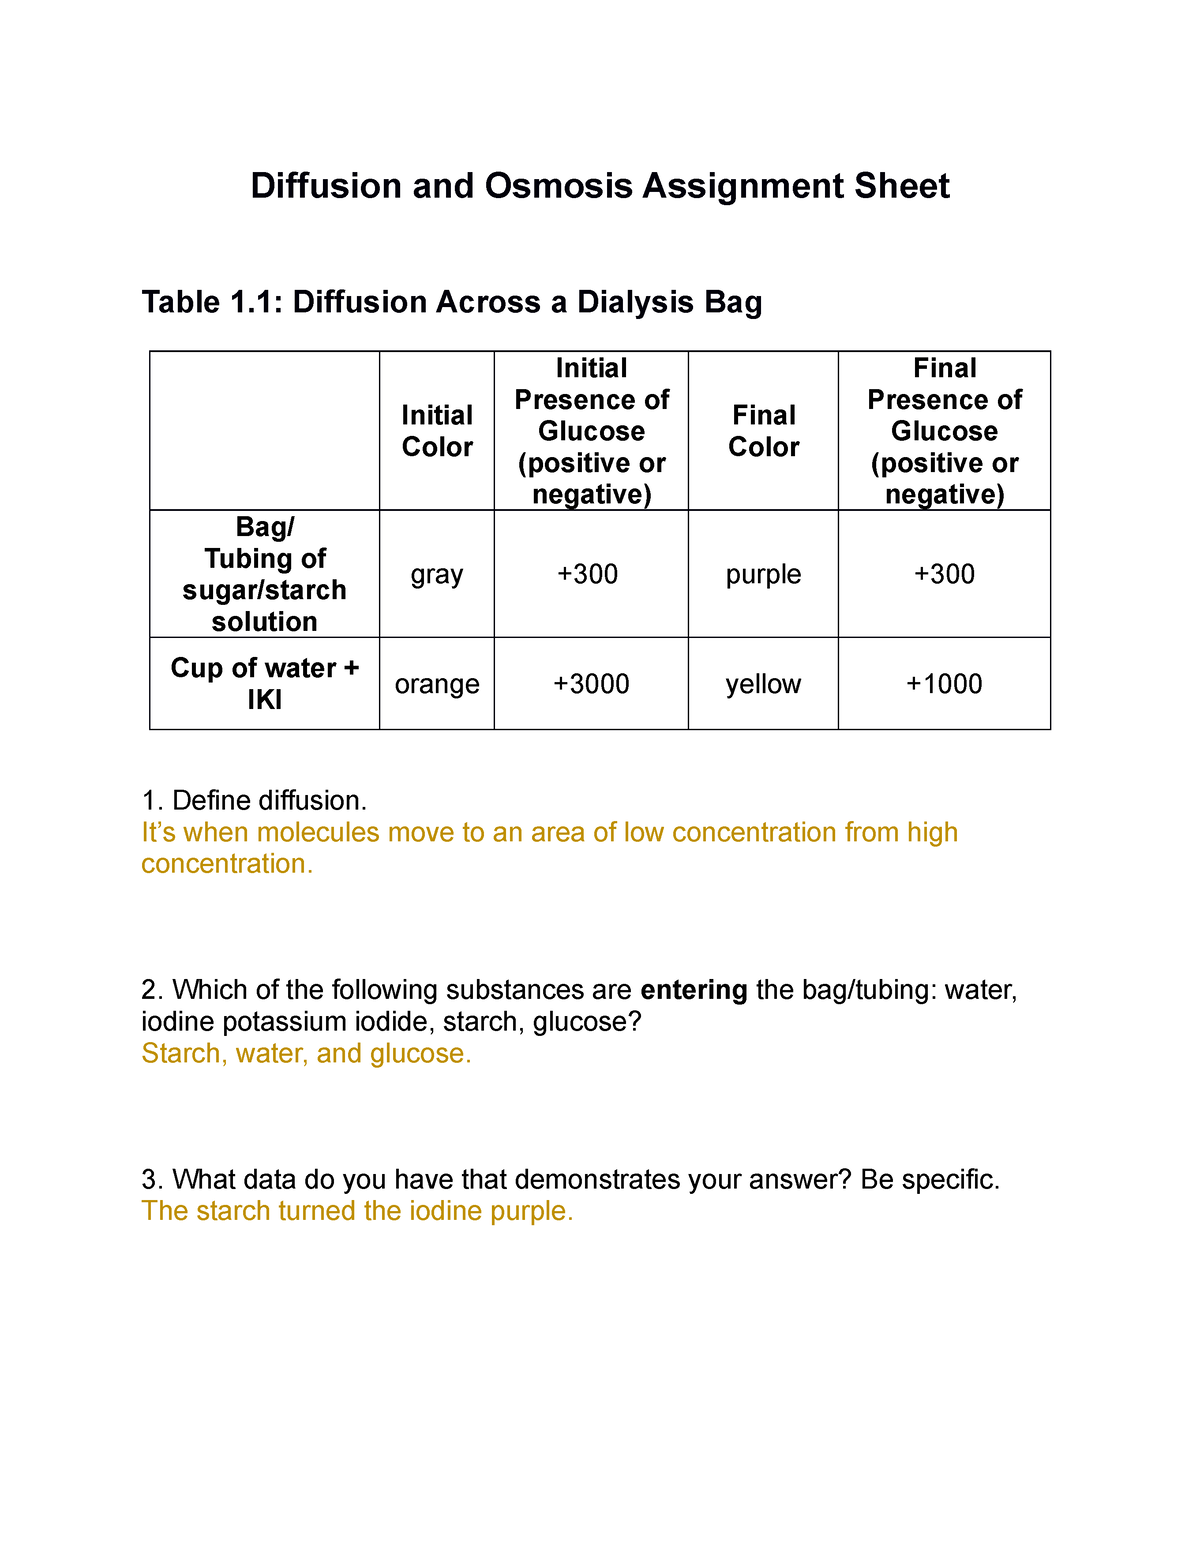 lab assignment 4 diffusion and osmosis